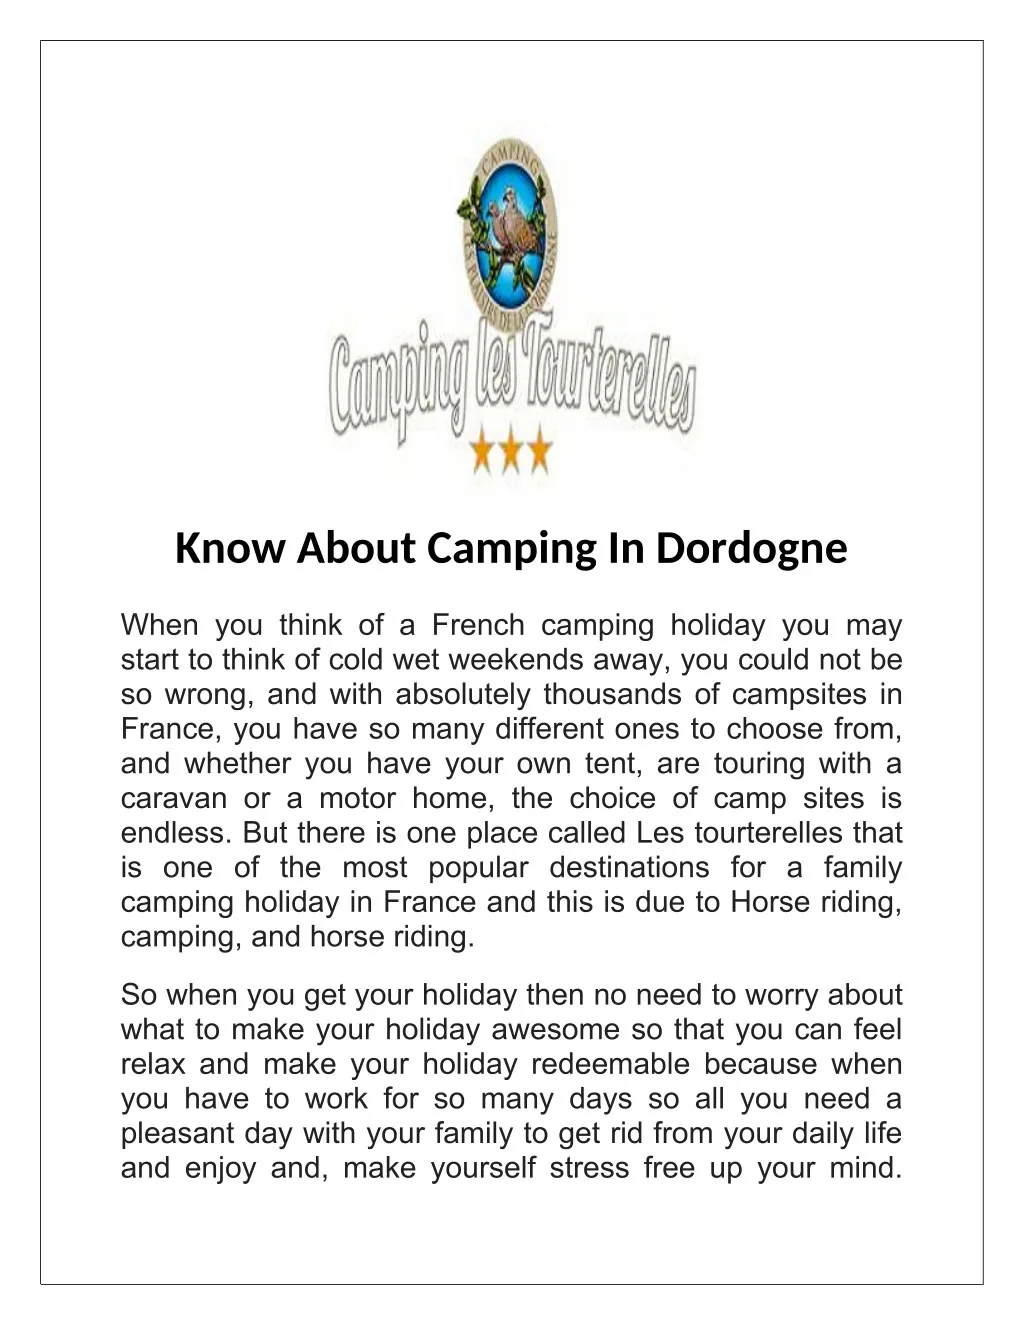 know about camping in dordogne